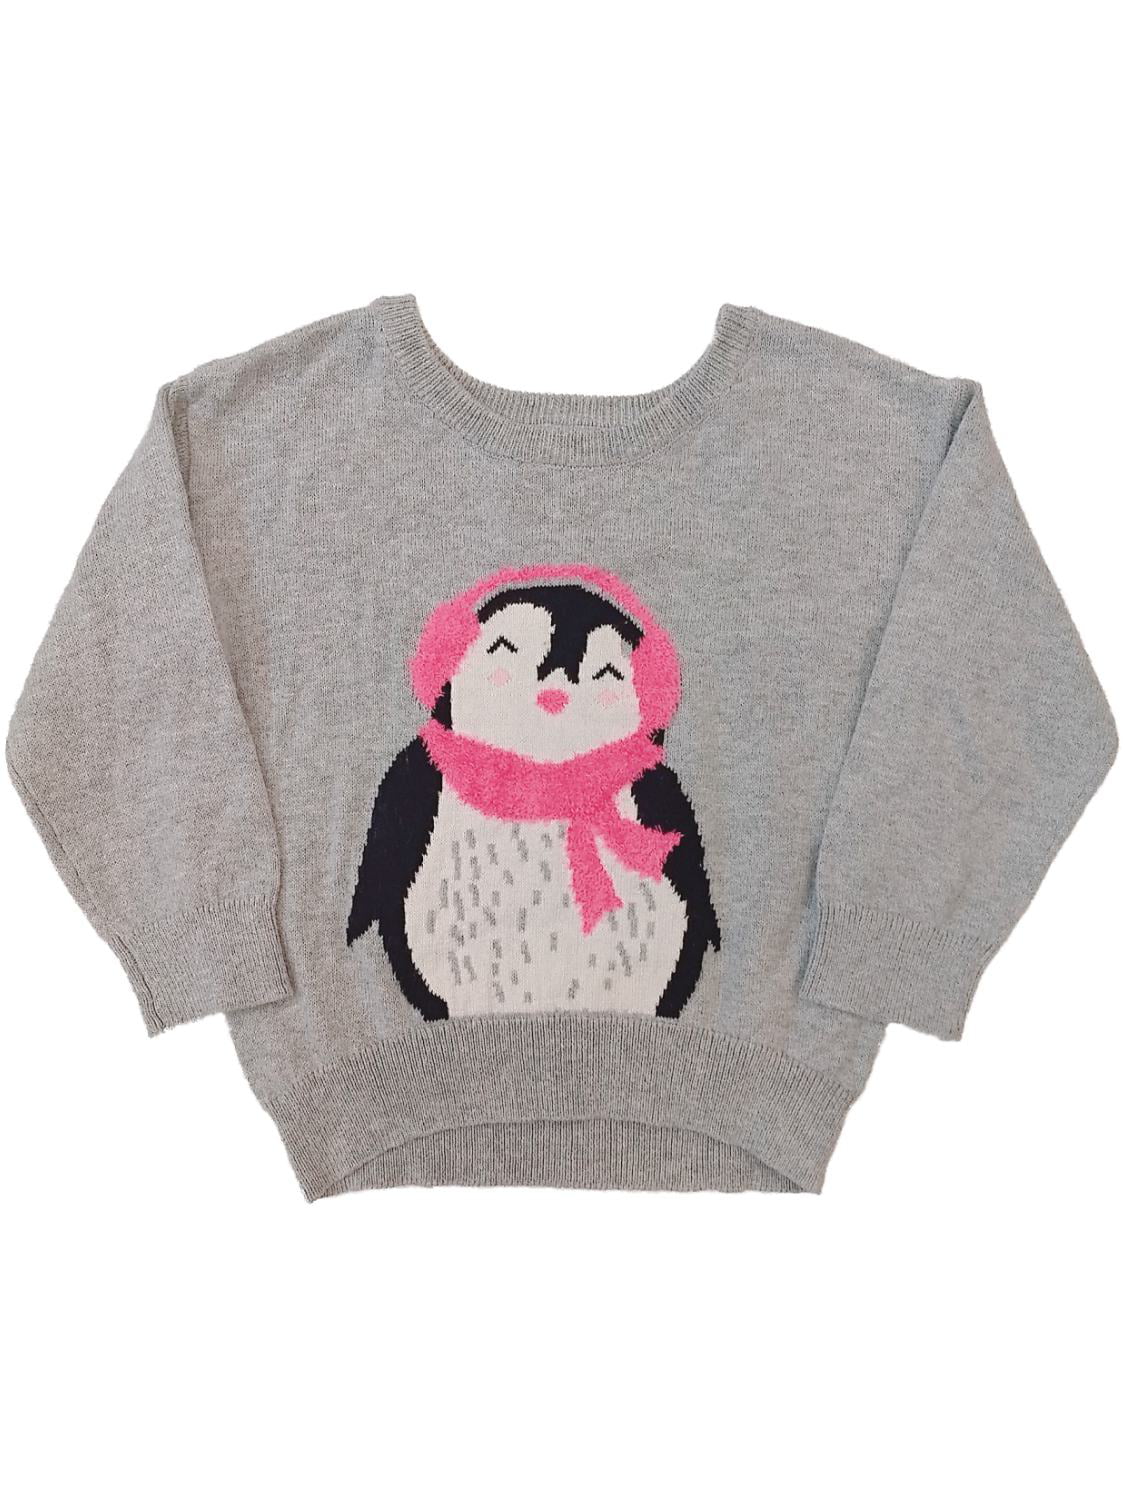 Gymboree Holiday Winter Penguin Baby Girls Size 3 Purple Top Shirt NWT NEW 